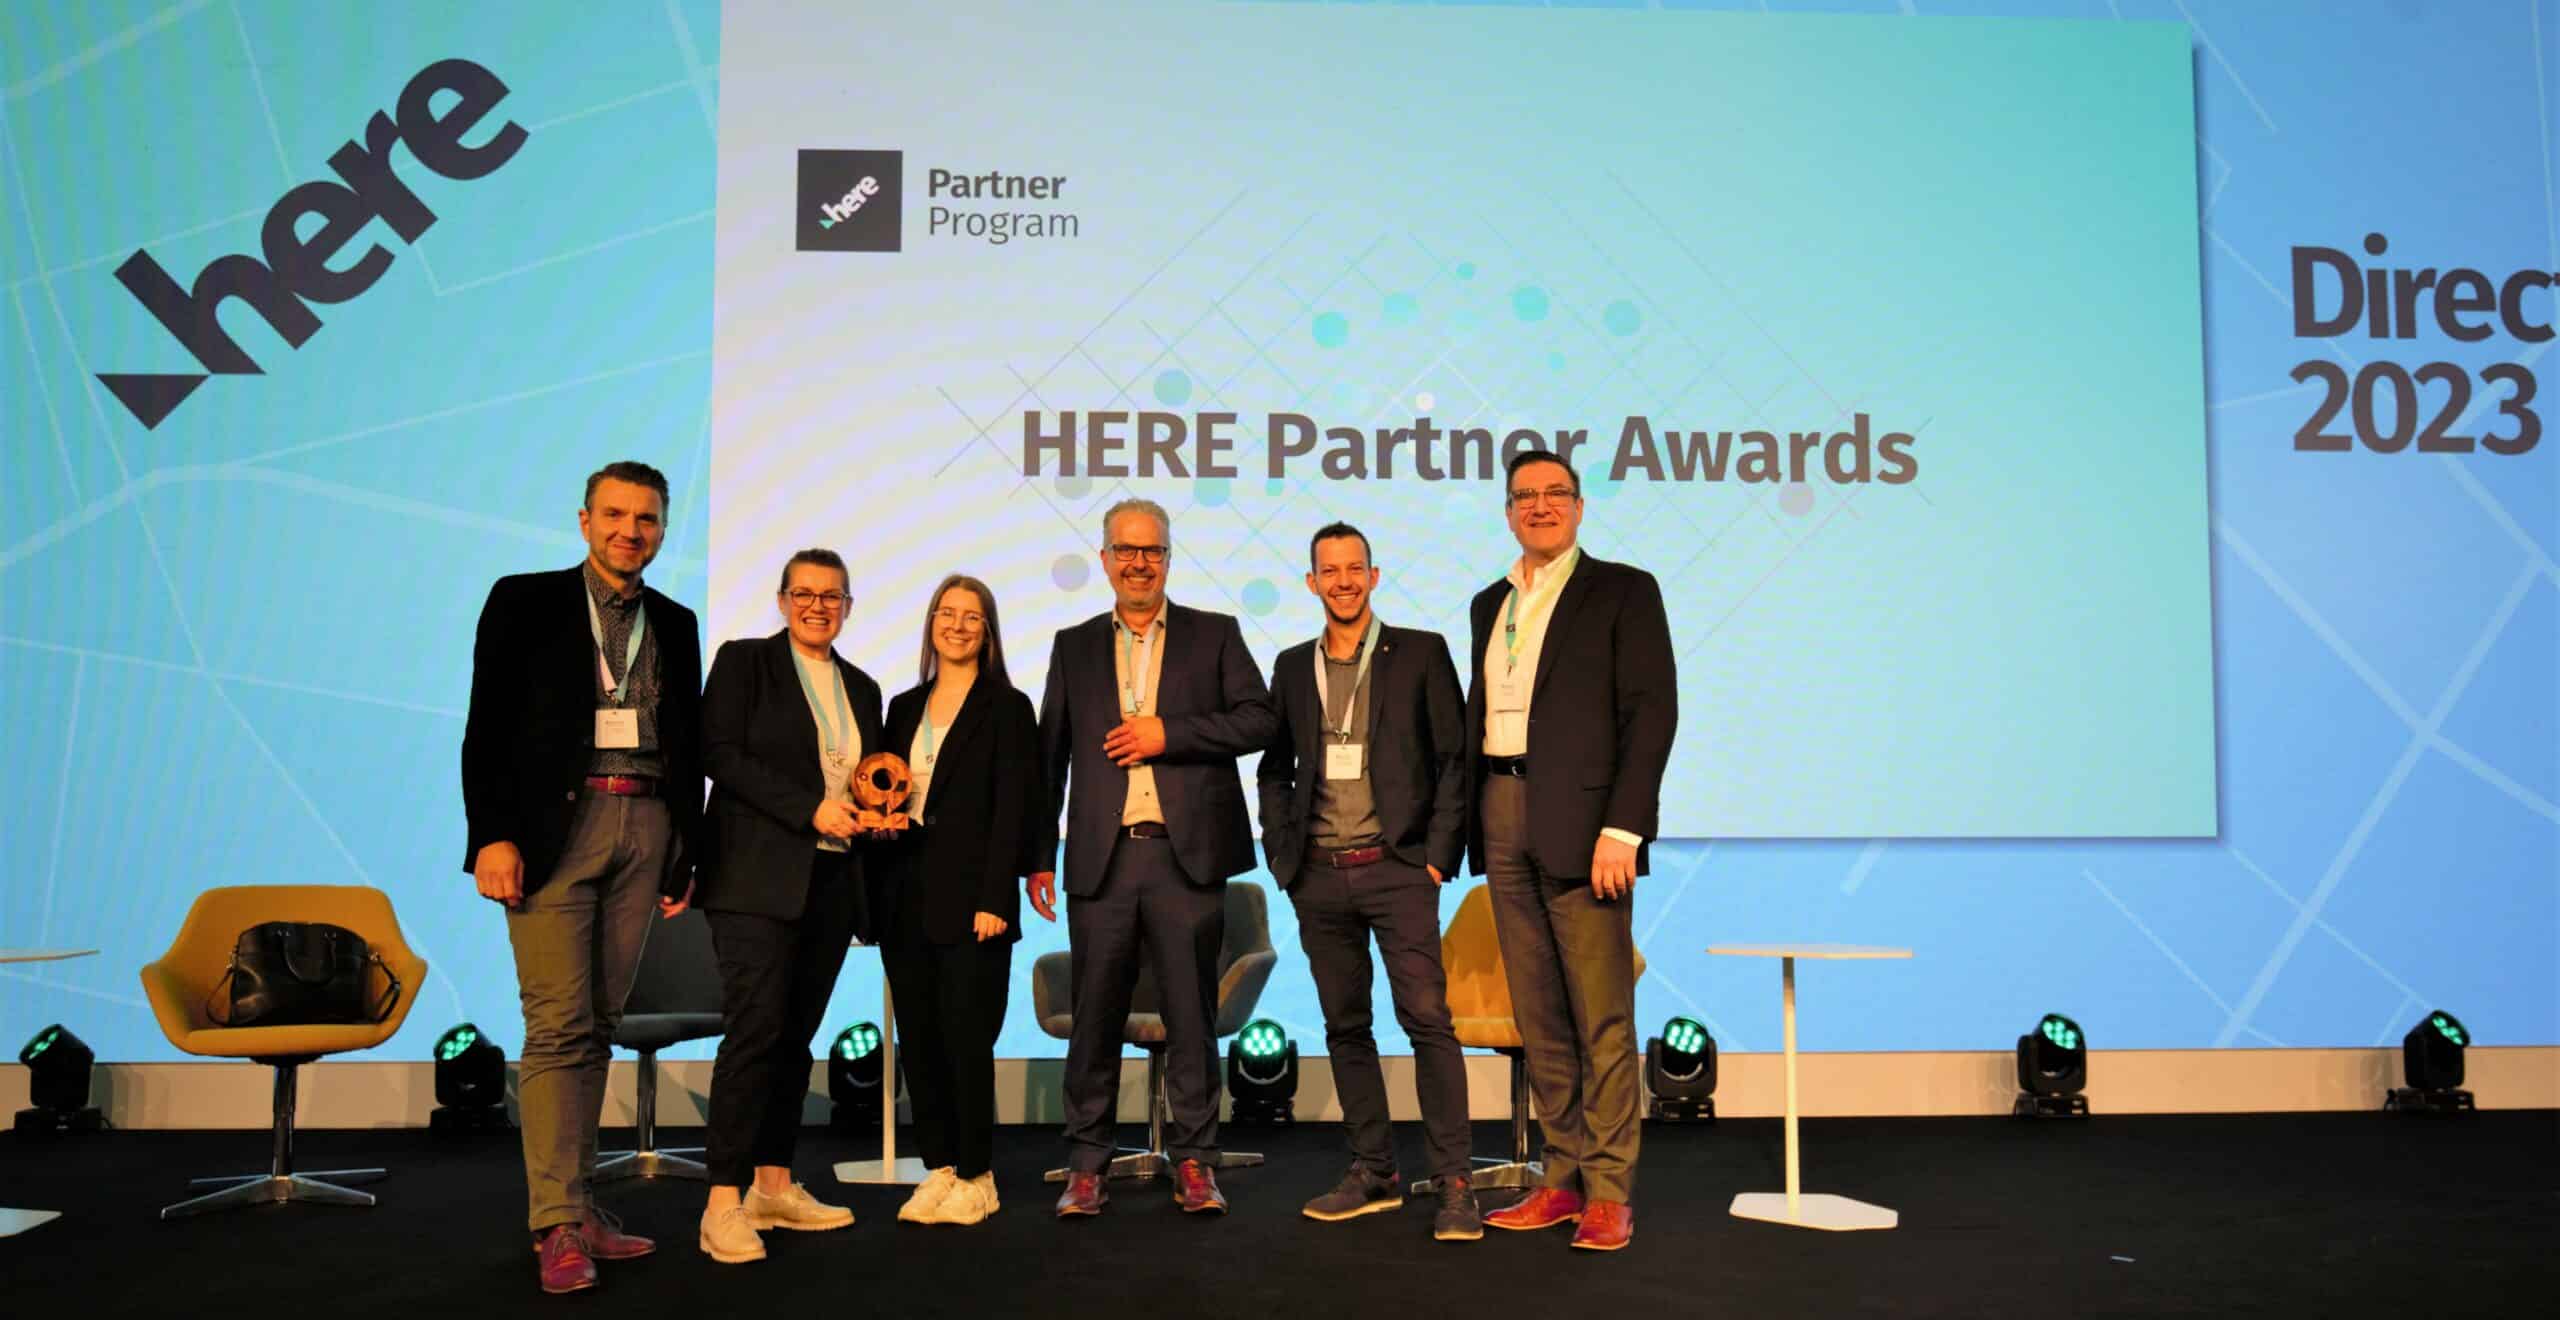 The MBI Team receiving the award for "HERE Distributor of the Year 2023" from John Ramieri, Vice President of Sales and Business Development at HERE Technologies